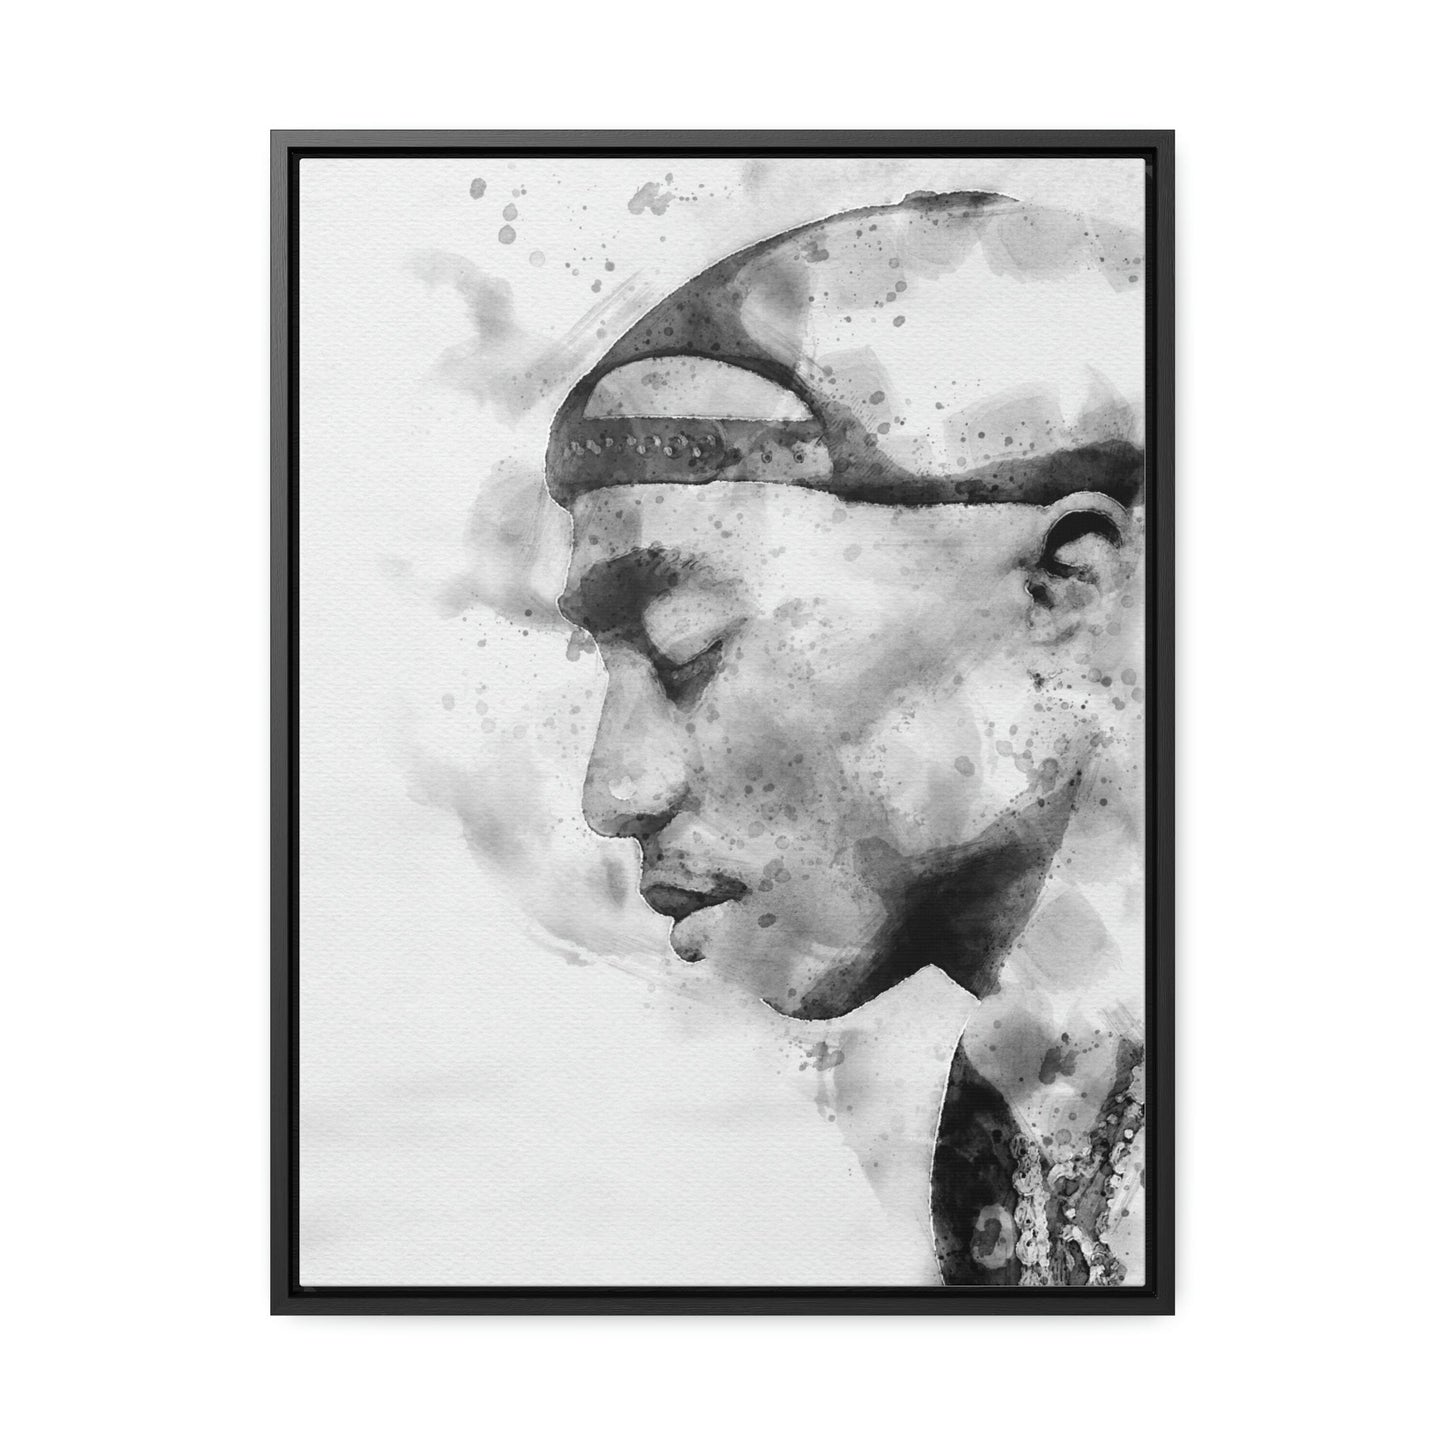 Tupac Poster, Canvas Wrap, Kids Room, Man Cave, Woman Cave, Game Room